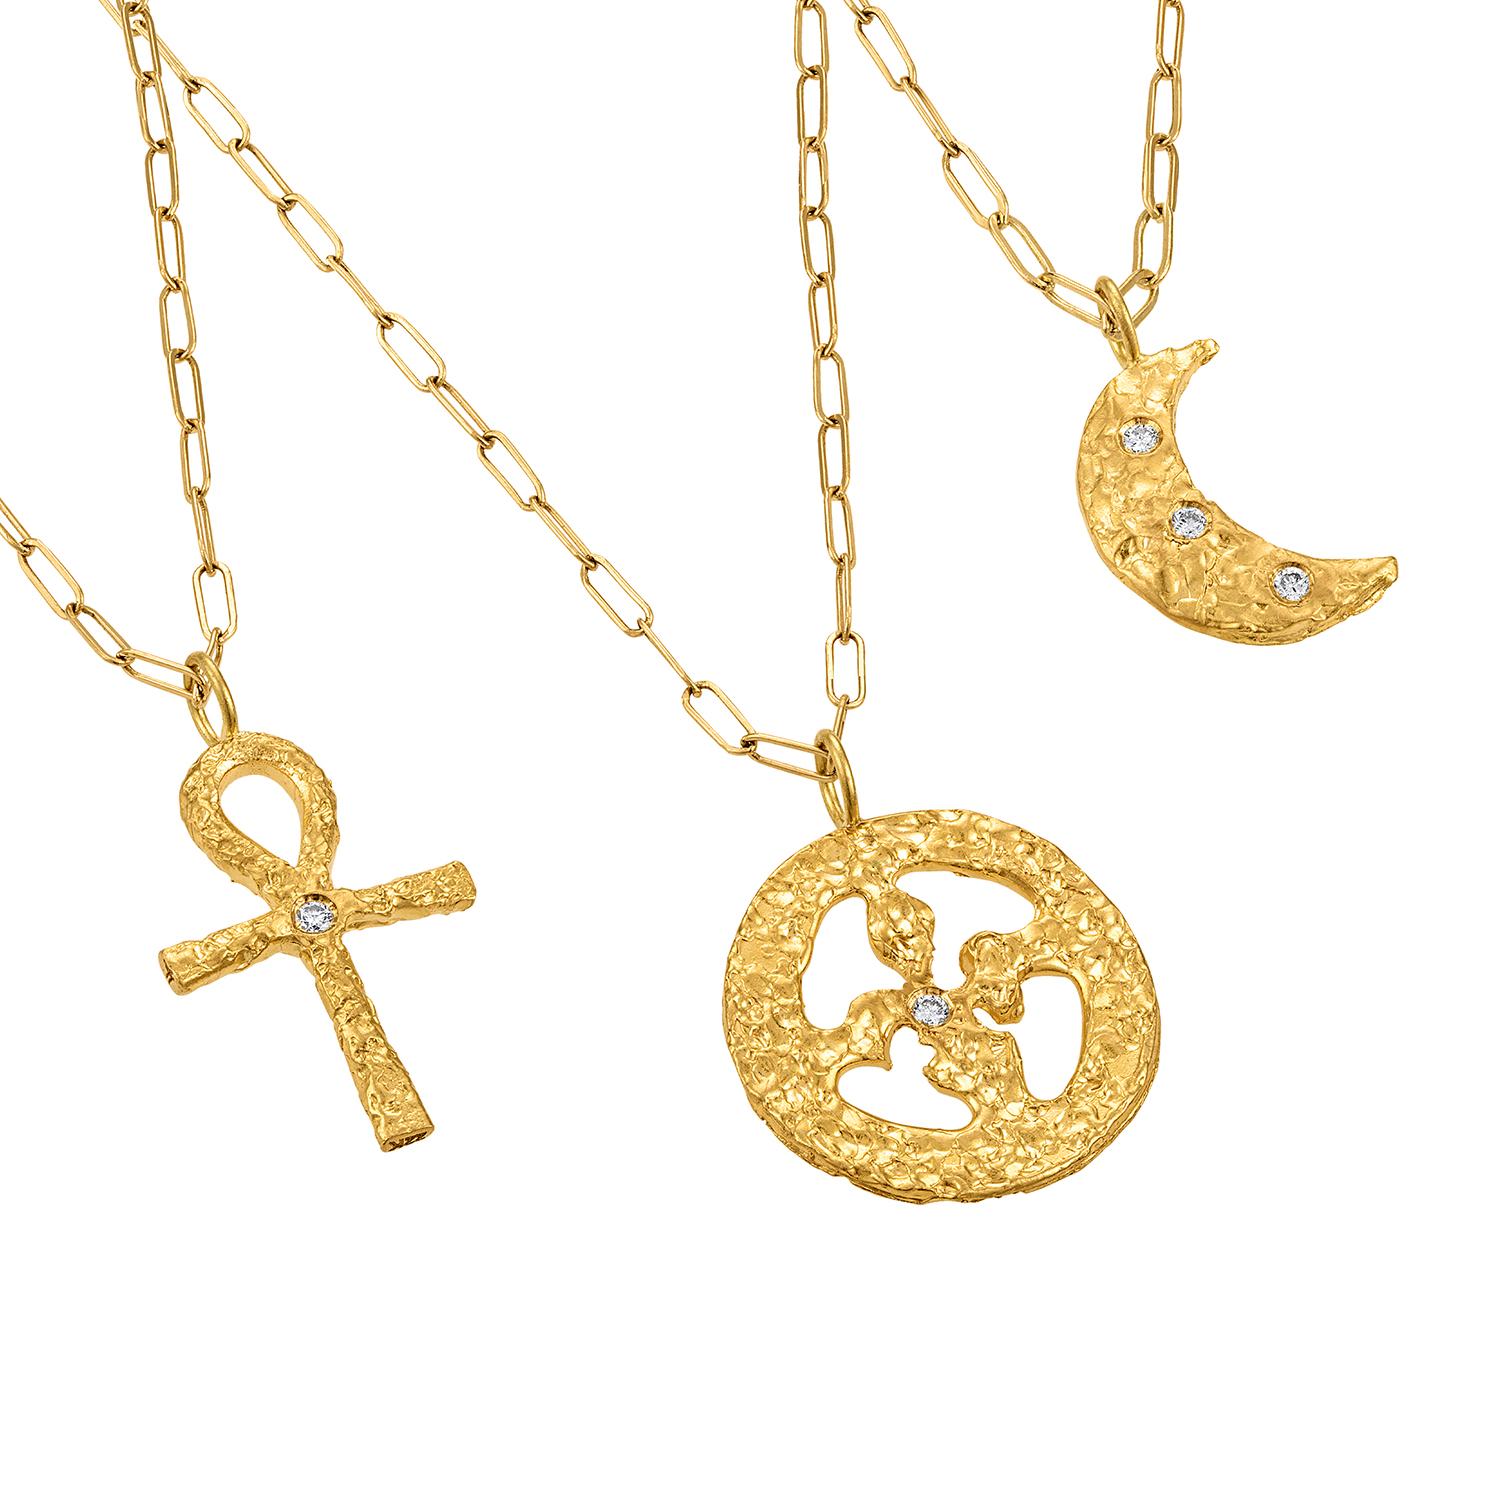 This exquisite diamond Crusader Cross Mini Pendant is a stunning piece that combines modern design with timeless elegance. It is a unique meaningful piece of jewelry. Handmade from solid 22k gold and features a Crusader Cross symbol, The Crusader